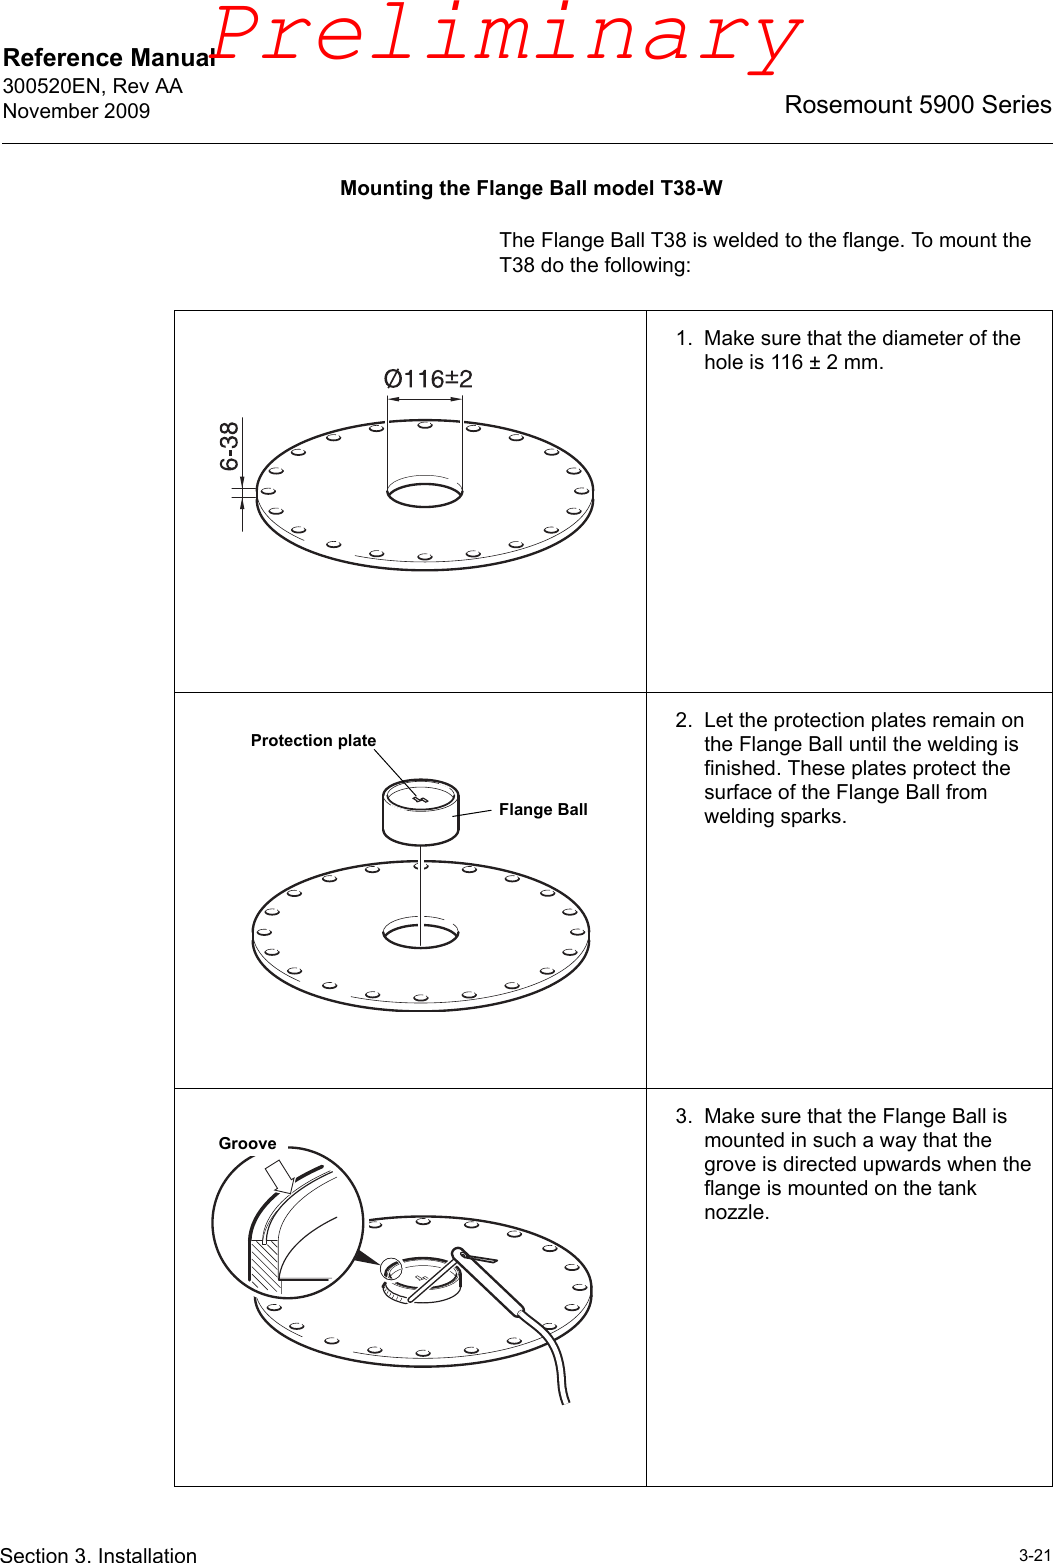 Reference Manual 300520EN, Rev AANovember 20093-21Rosemount 5900 SeriesSection 3. InstallationMounting the Flange Ball model T38-WThe Flange Ball T38 is welded to the flange. To mount the T38 do the following:1. Make sure that the diameter of the hole is 116 ± 2 mm.2. Let the protection plates remain on the Flange Ball until the welding is finished. These plates protect the surface of the Flange Ball from welding sparks.3. Make sure that the Flange Ball is mounted in such a way that the grove is directed upwards when the flange is mounted on the tank nozzle.Protection plateFlange BallGroovePreliminary